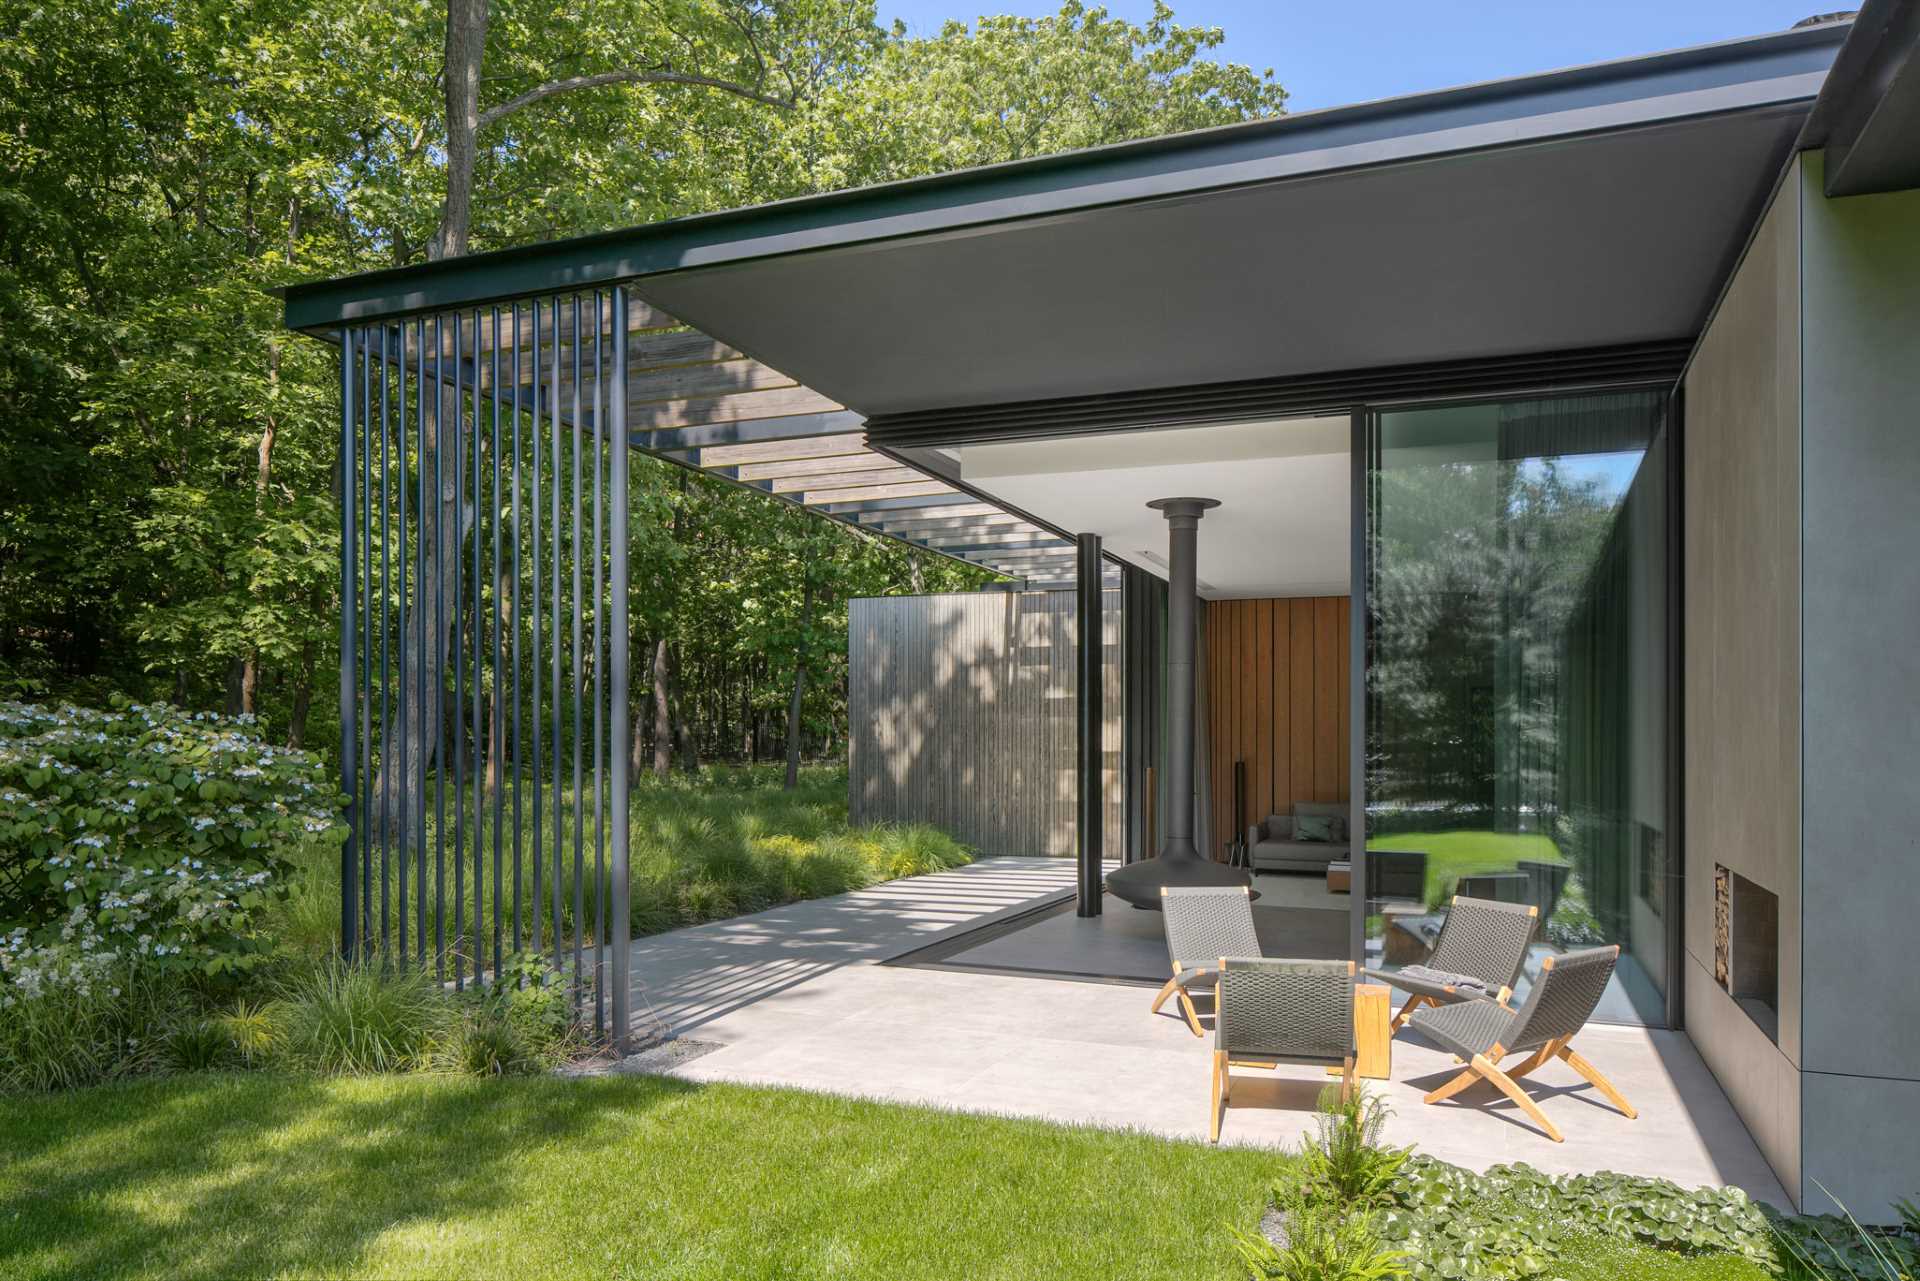 Retracting glass walls connect the interior spaces with the outdoors, while the floors extend beyond the building outline to merge the spaces.